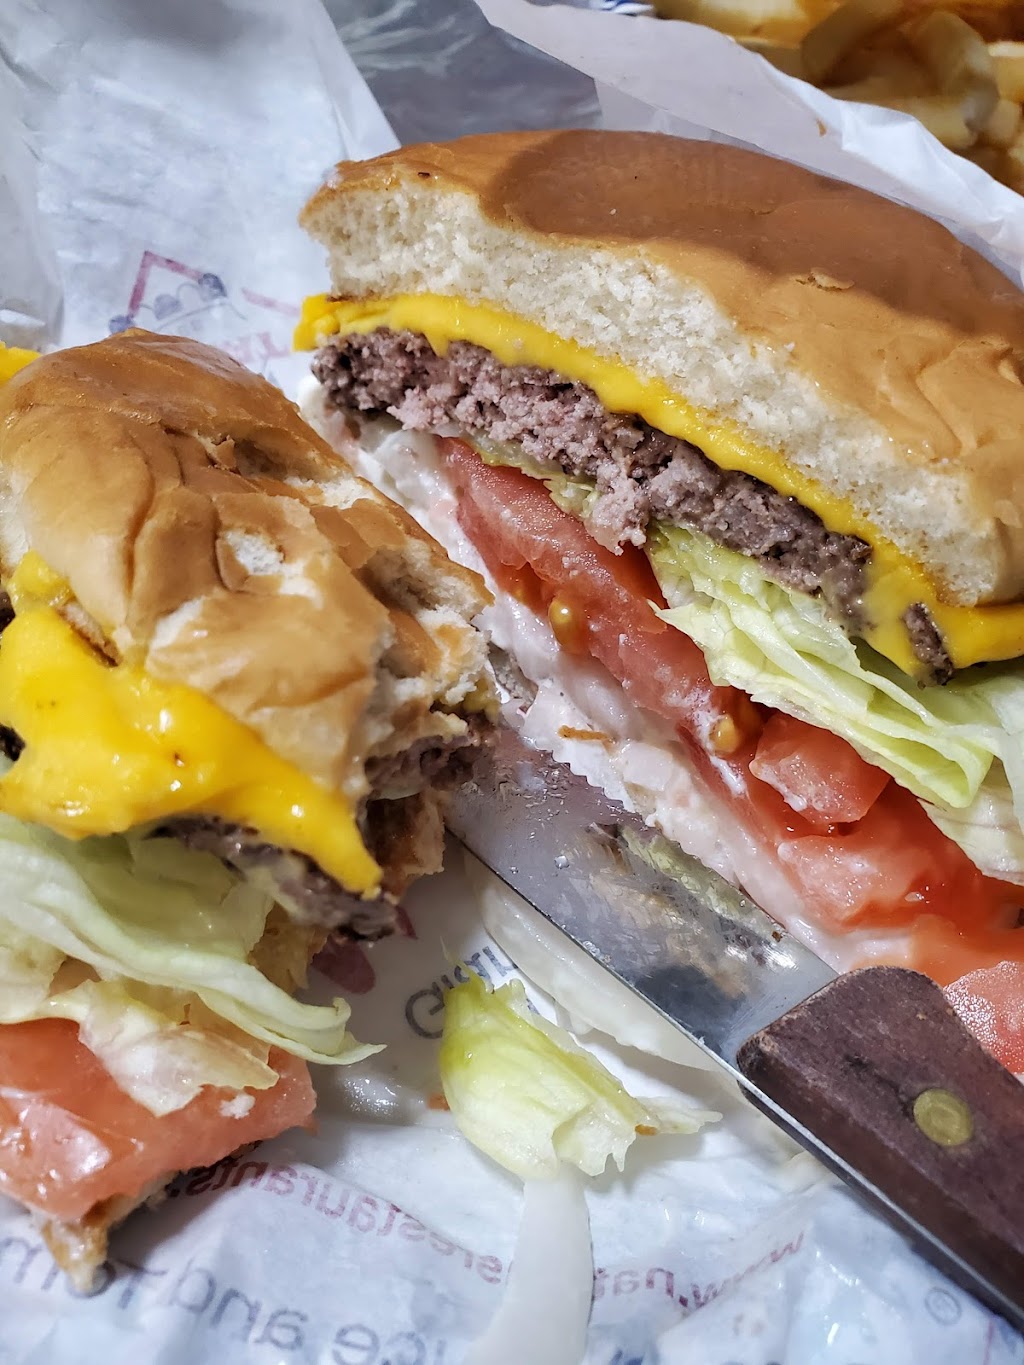 Nations Giant Hamburgers & Great Pies | 2525 Sonoma Blvd, Vallejo, CA 94590 | Phone: (707) 554-8888